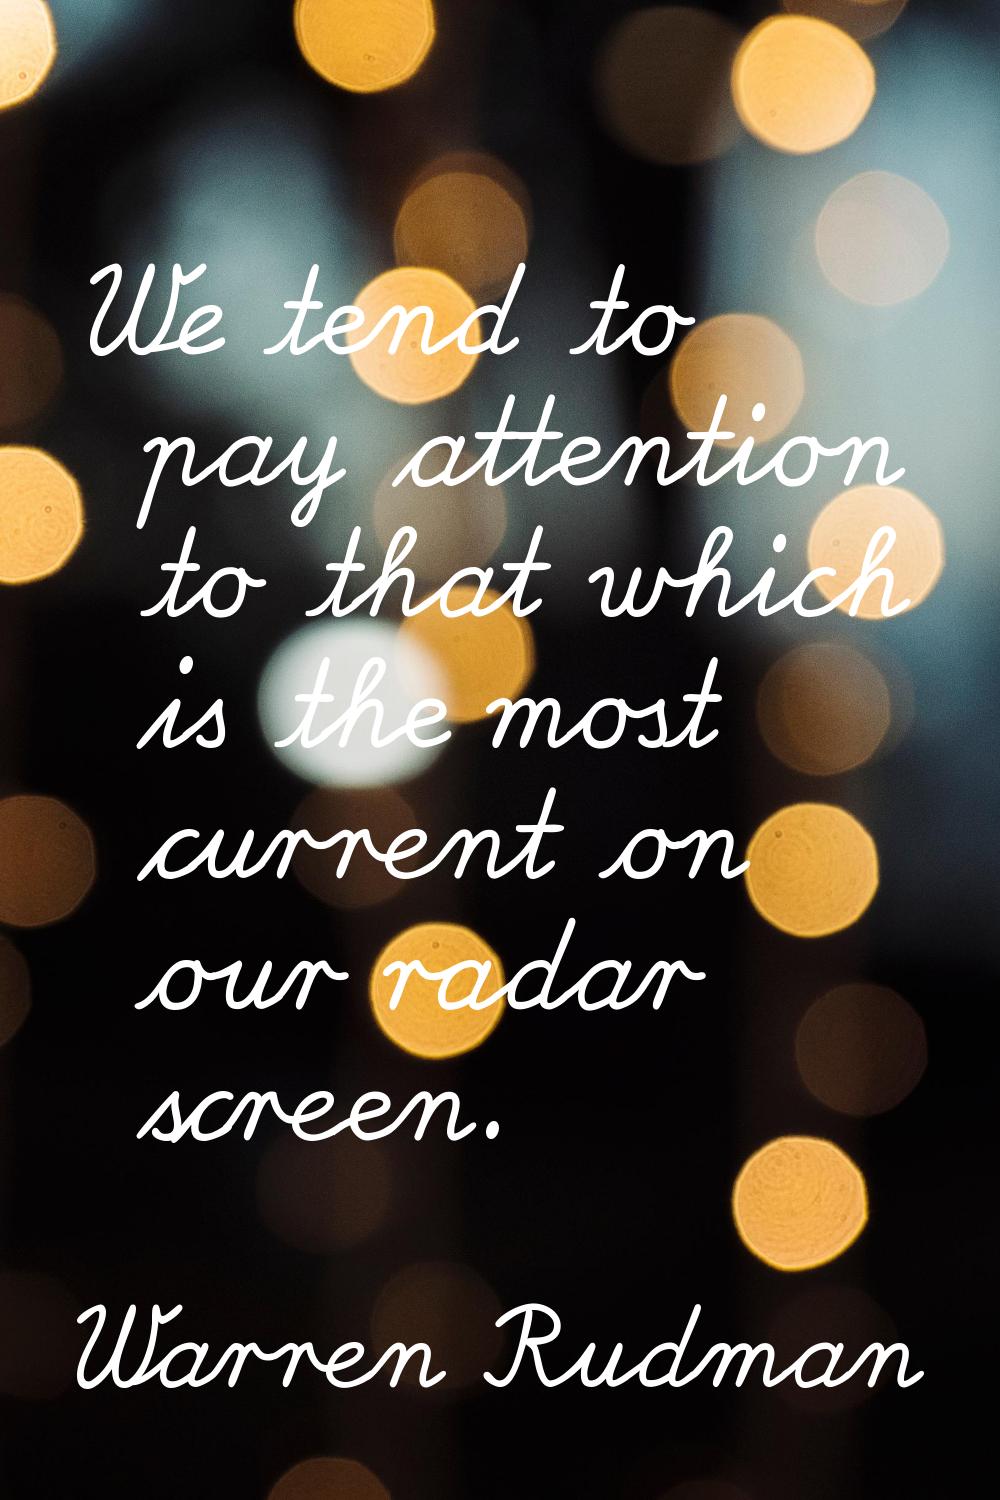 We tend to pay attention to that which is the most current on our radar screen.